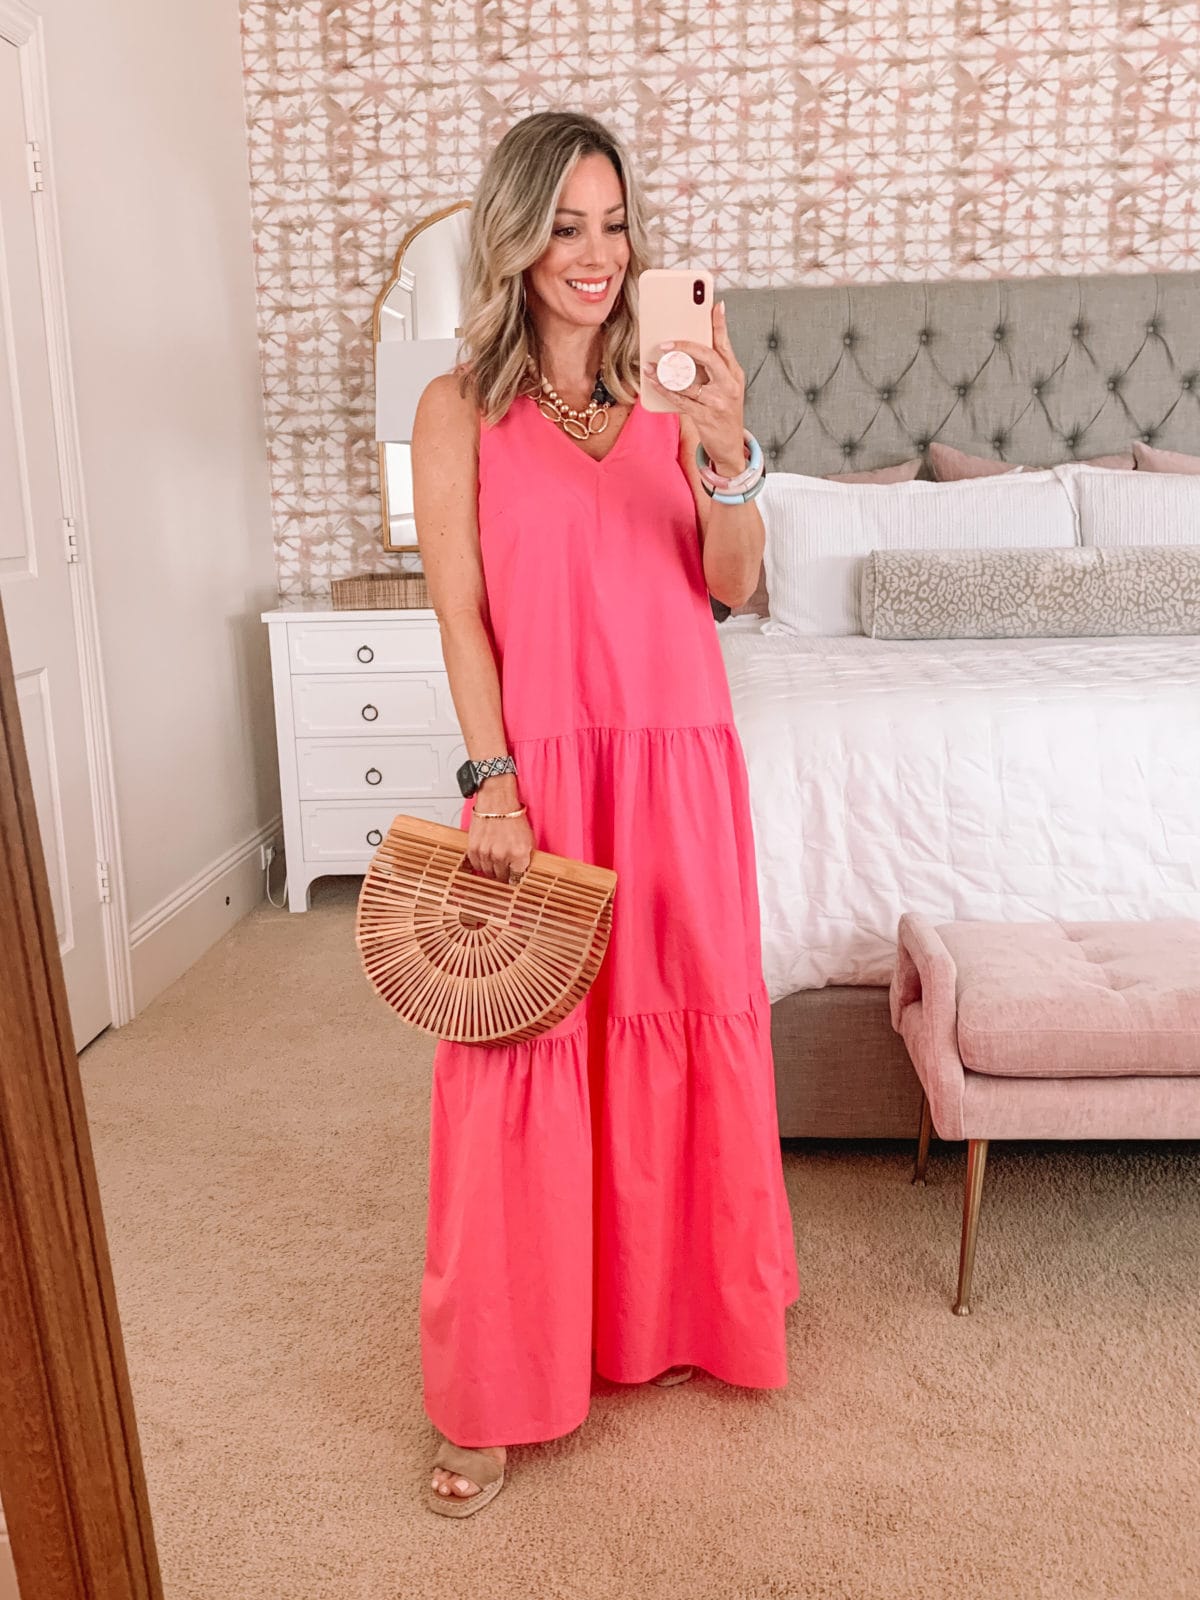 Dressing Room Finds, Target Maxi Dress and Bamboo Clutch with Wedges